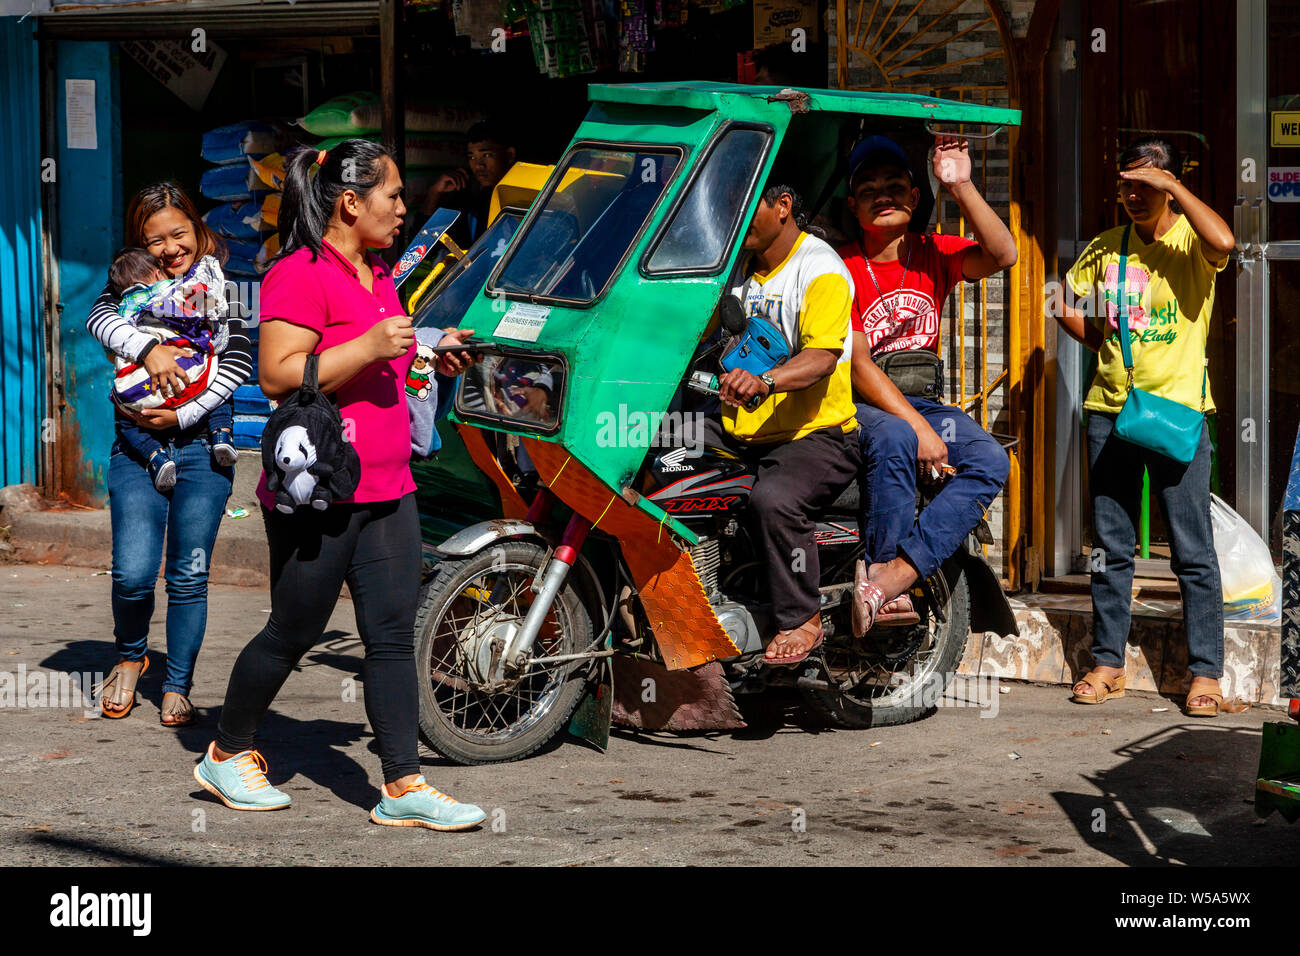 Local People Travelling By Tricycle, Banaue, Luzon, The Philippines Stock Photo